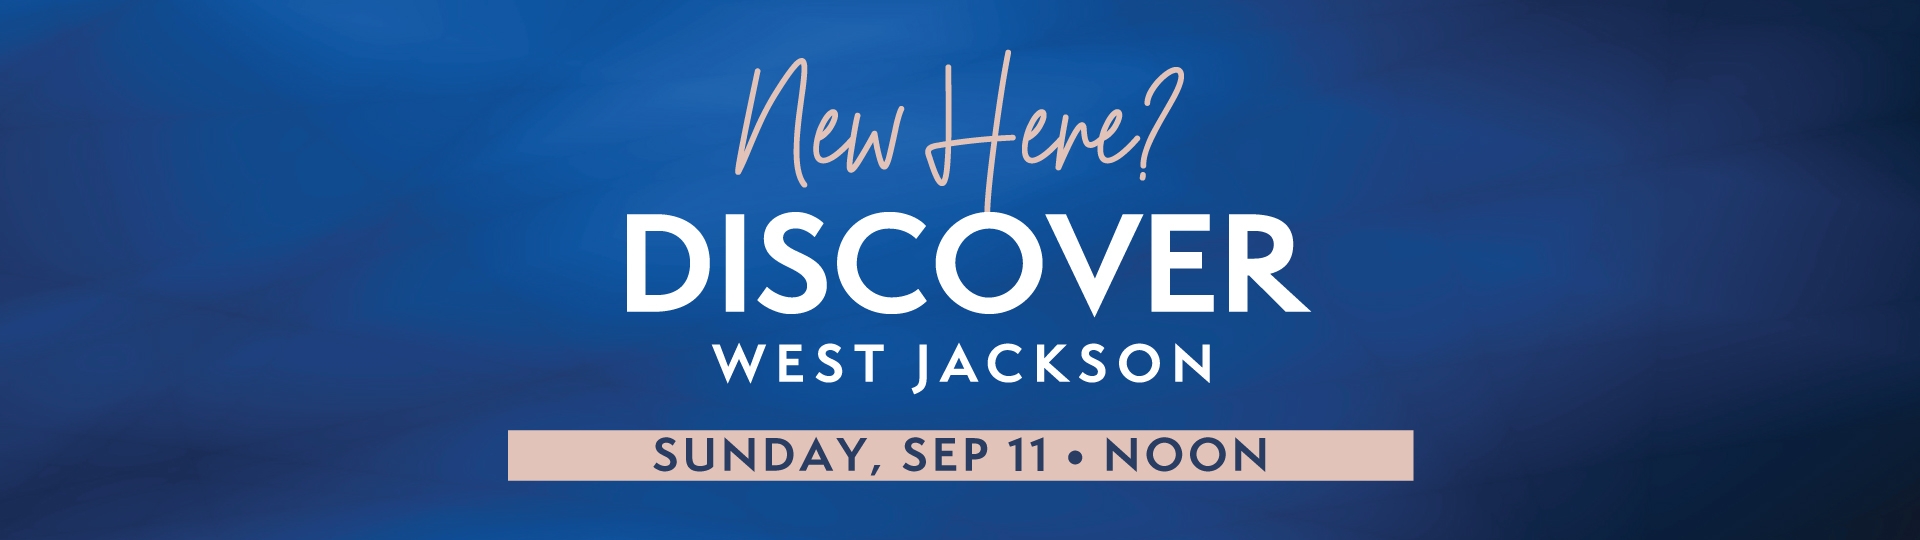 New Here? Discover West Jackson. Sunday, Sep 11 • Noon